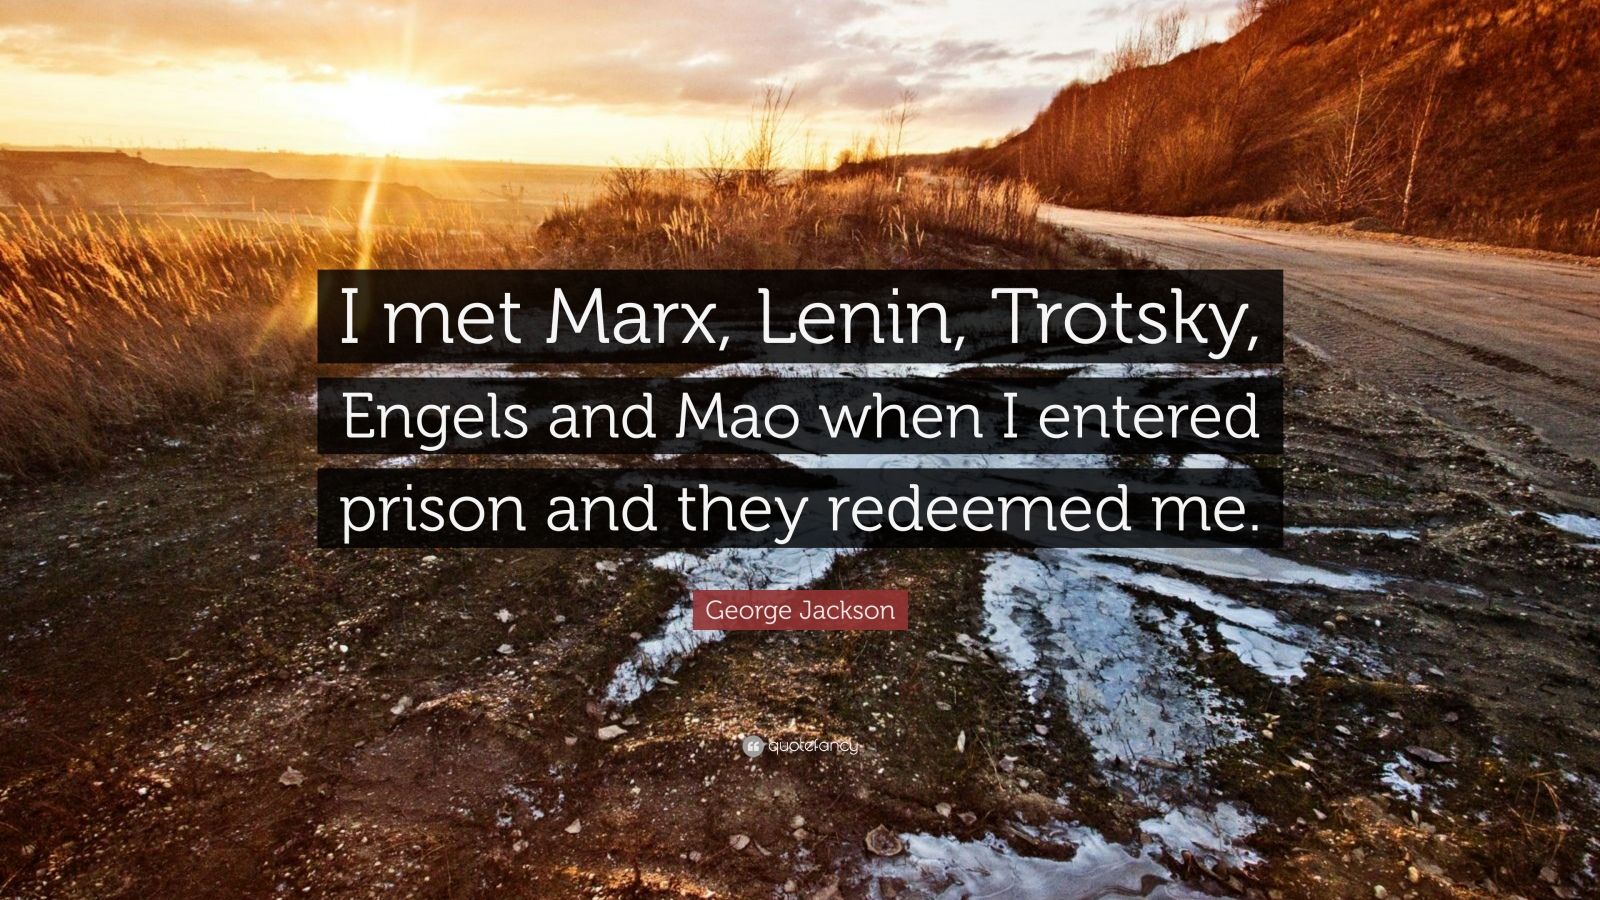 Jackson Quote “I met Marx, Lenin, Trotsky, Engels and Mao when